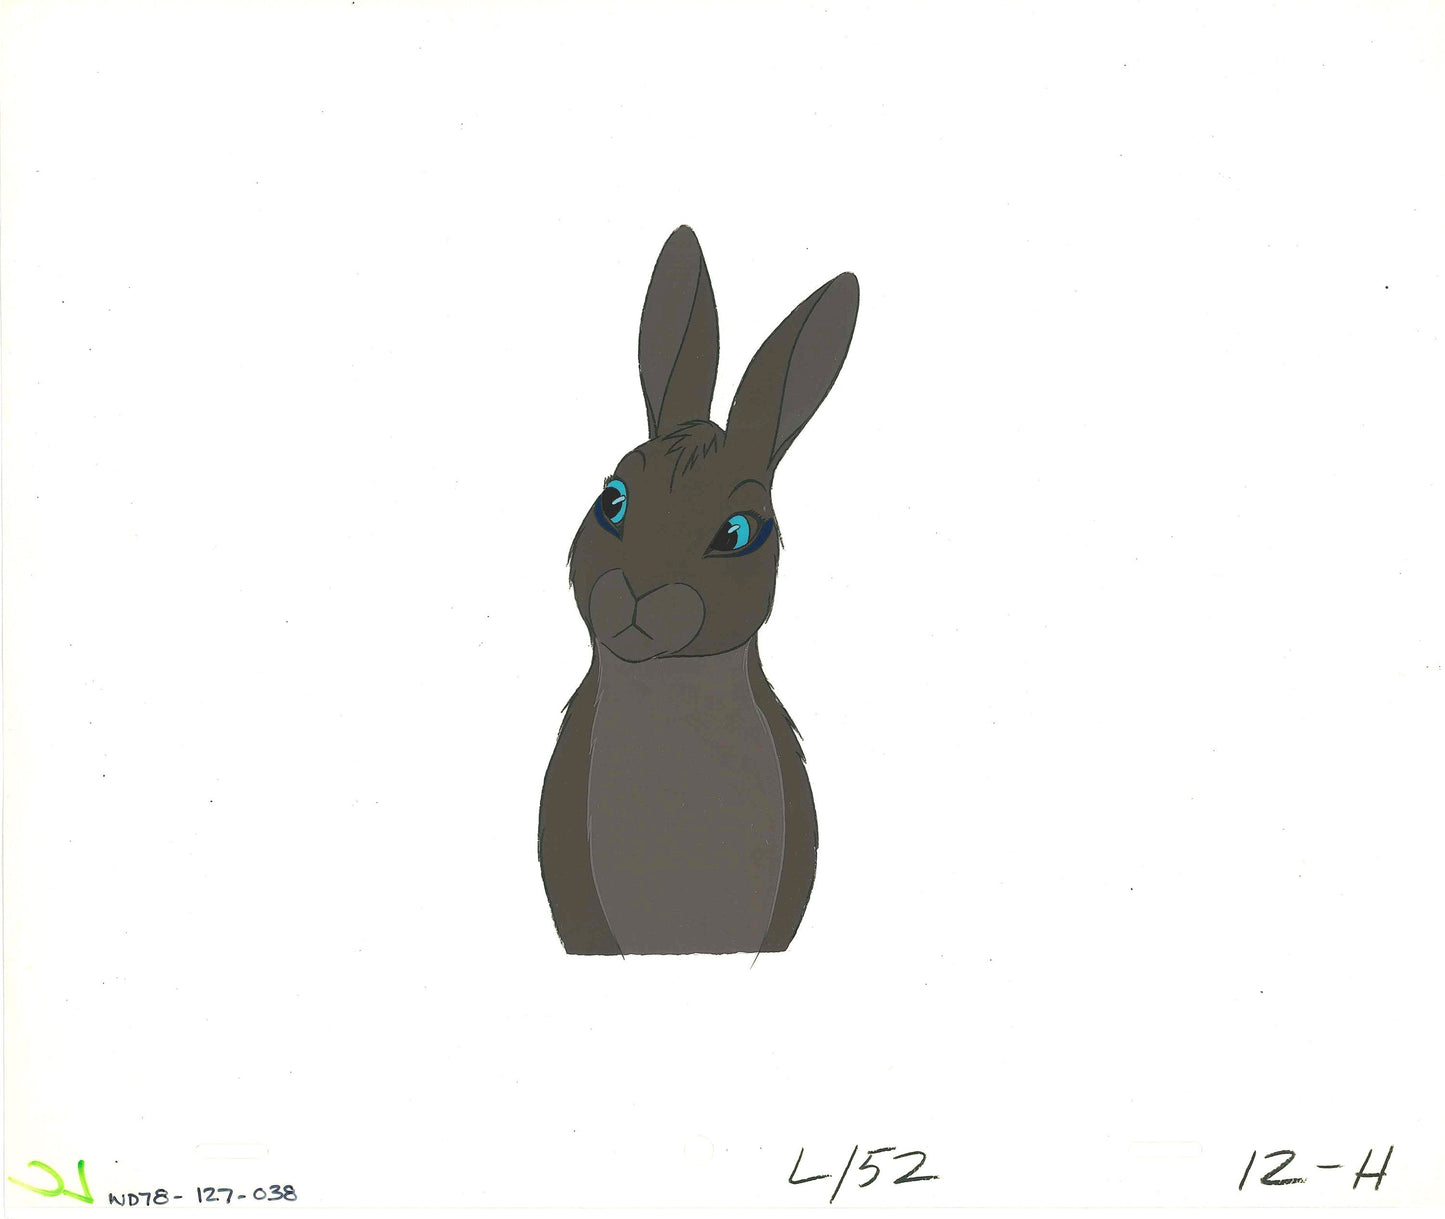 Watership Down 1978 Original Production Animation Cel with LJE Seal and COA 27-38